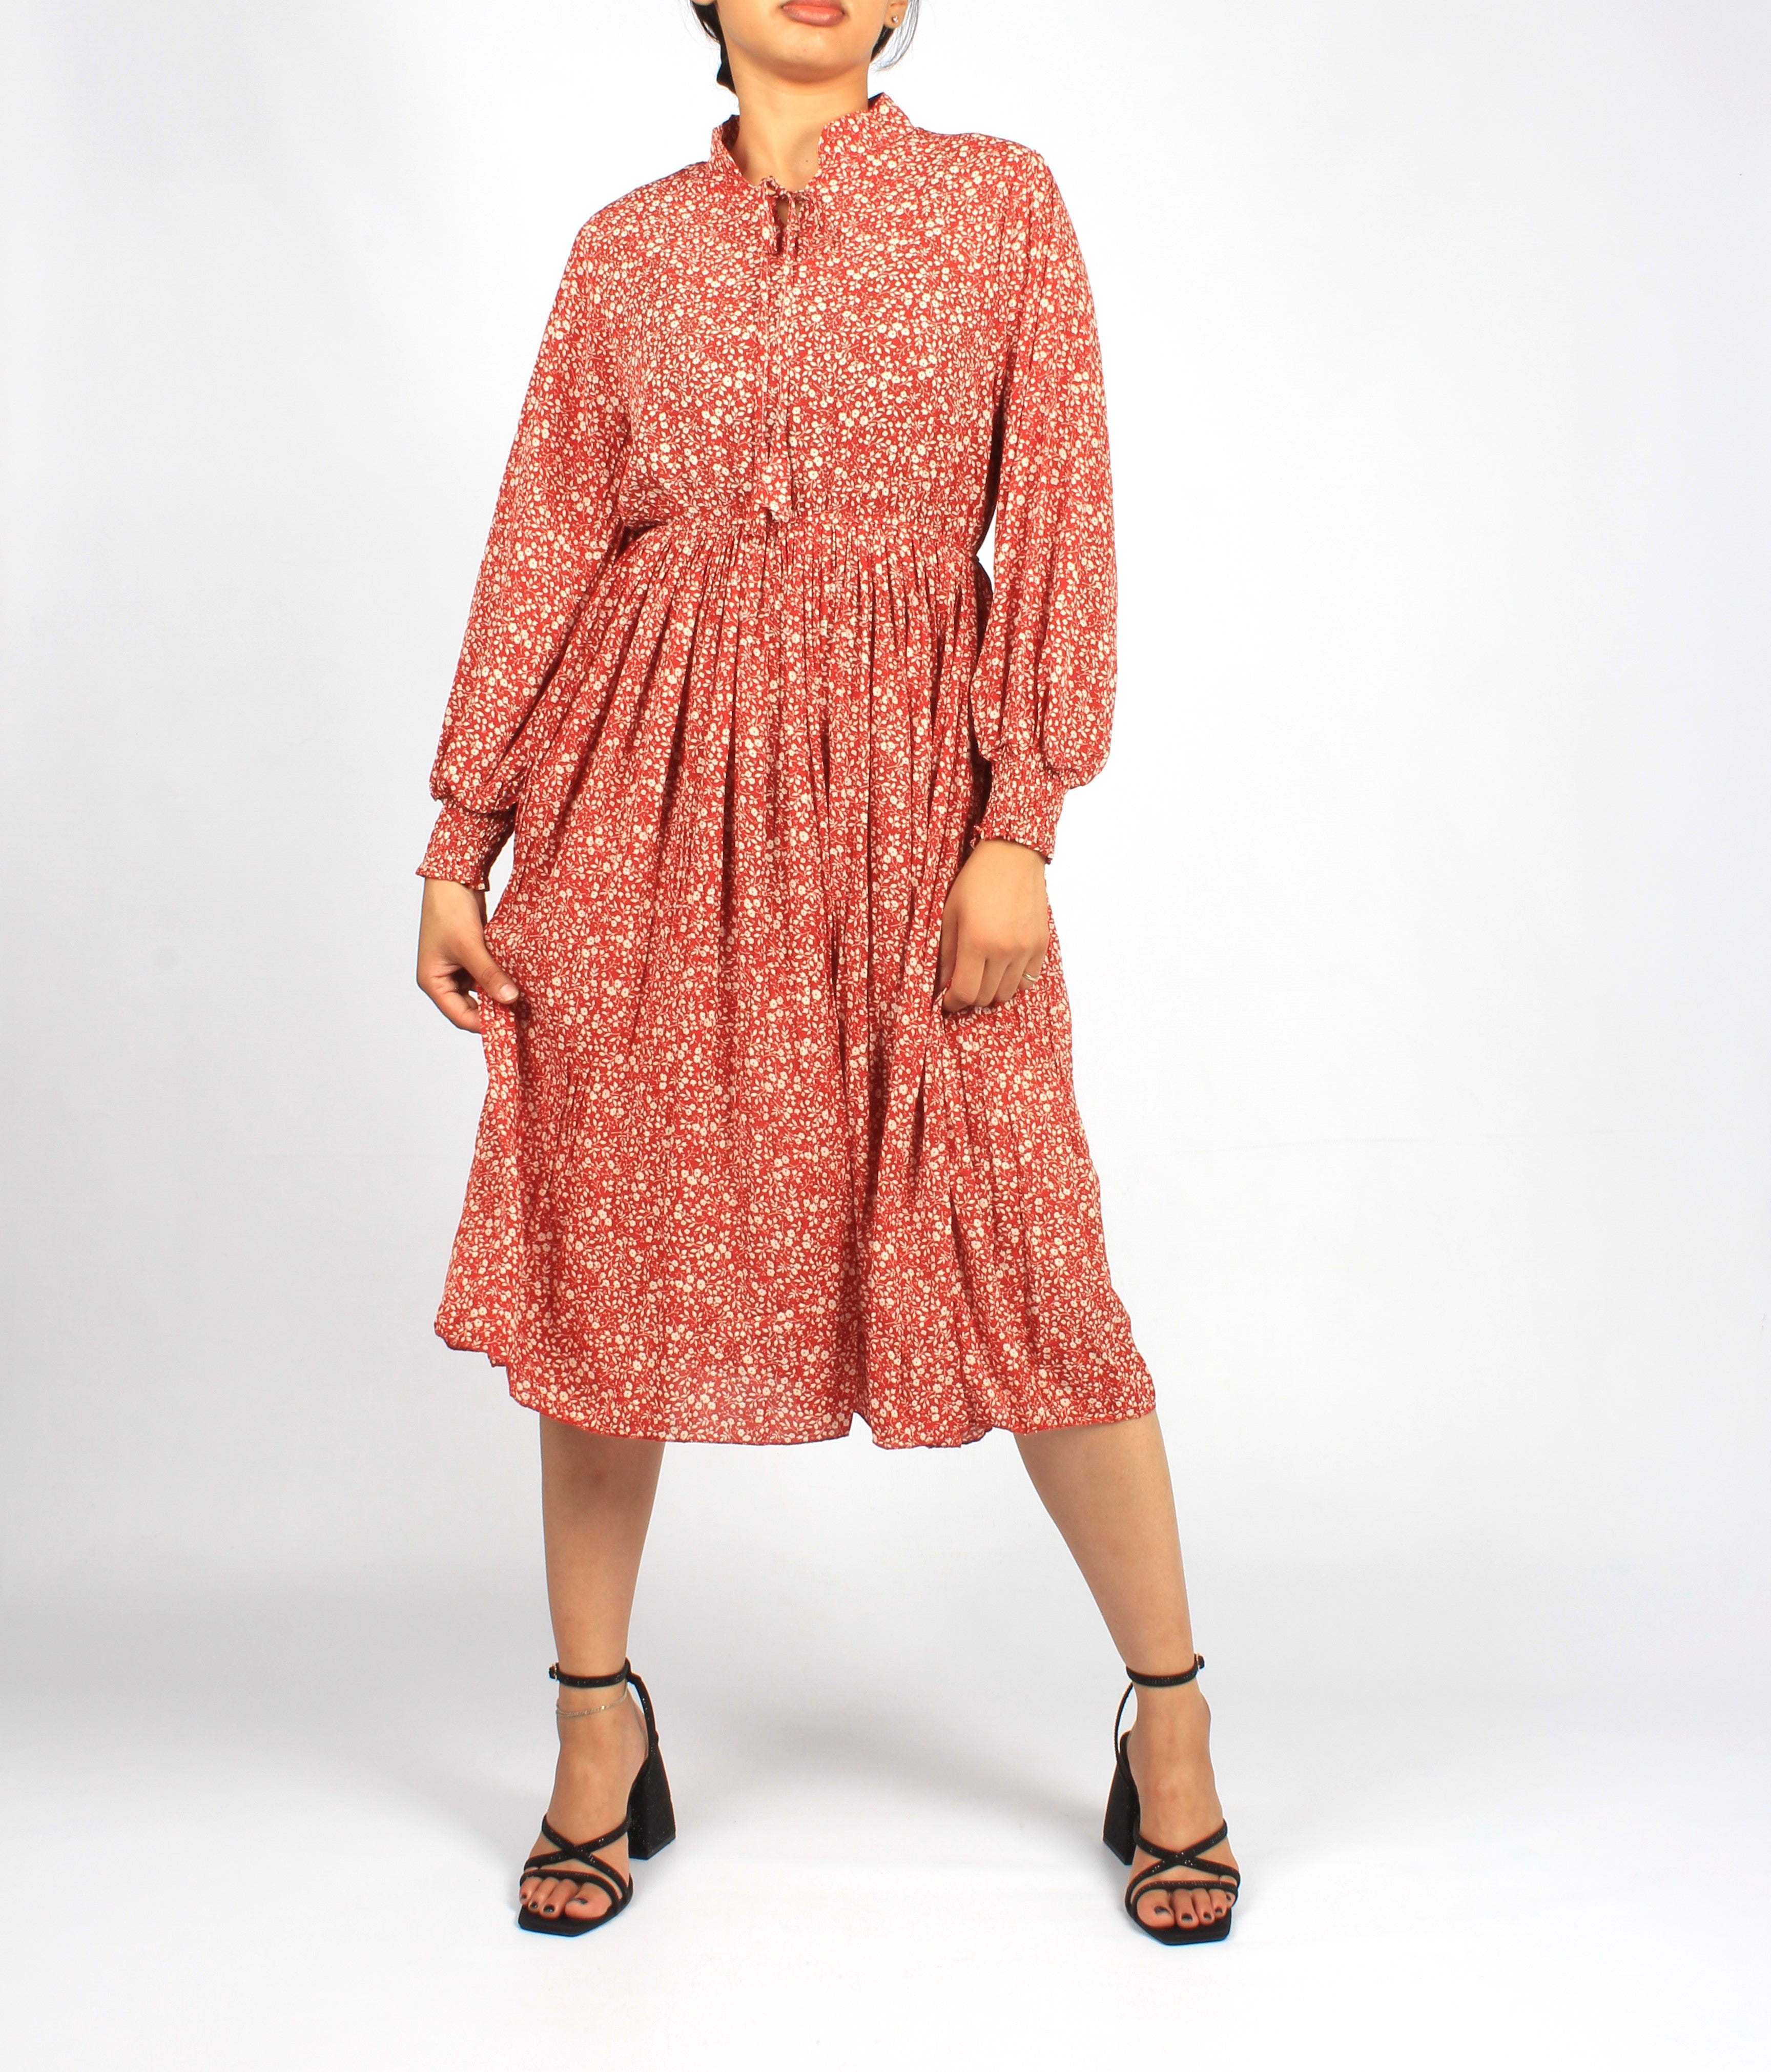 Stand-up Collar Midi Floral Dress